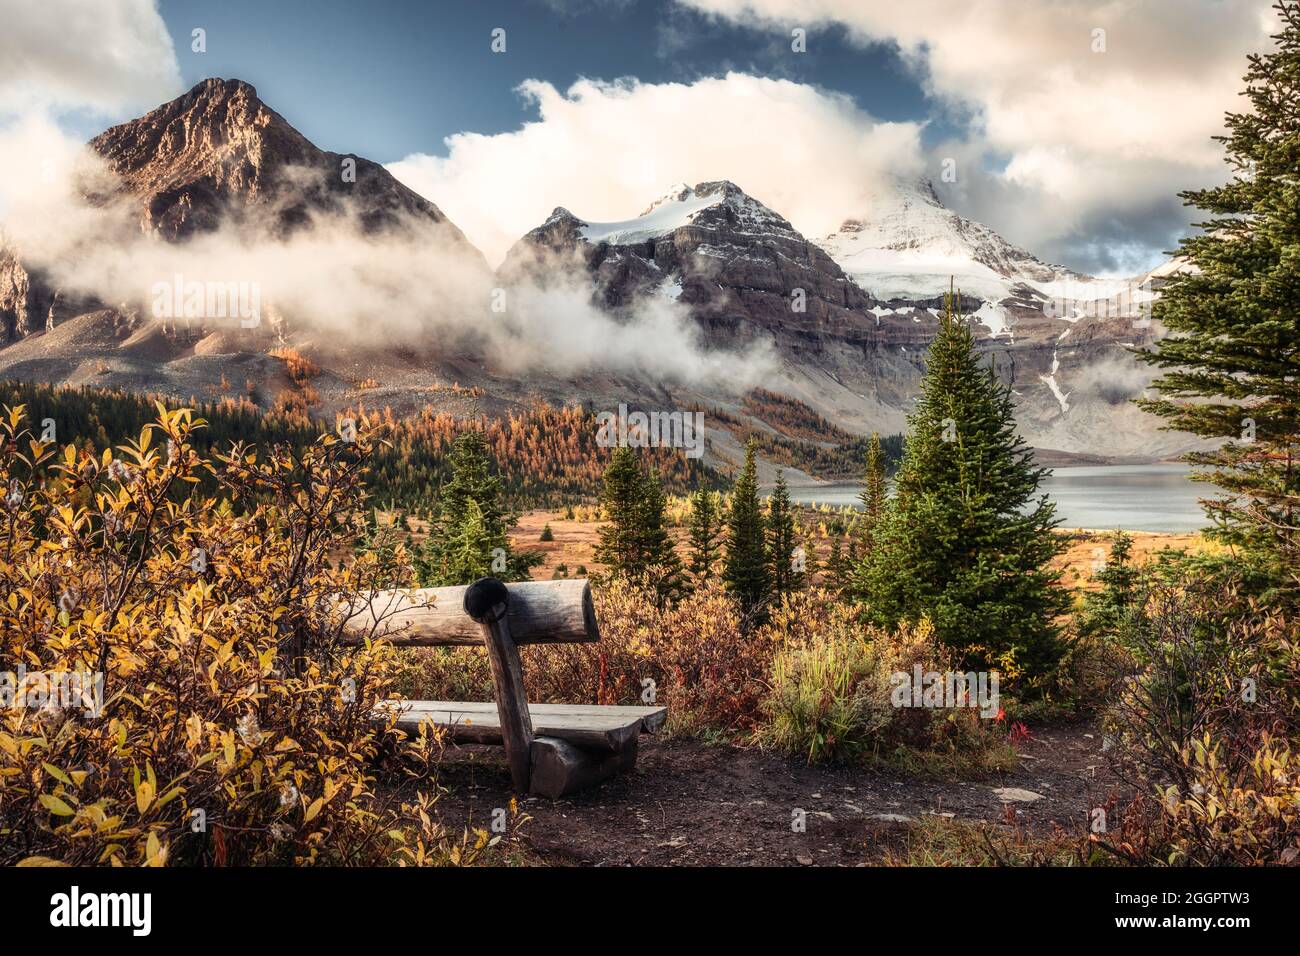 Scenery Of Mount Assiniboine On Lake Magog And Wooden Chair In Autumn